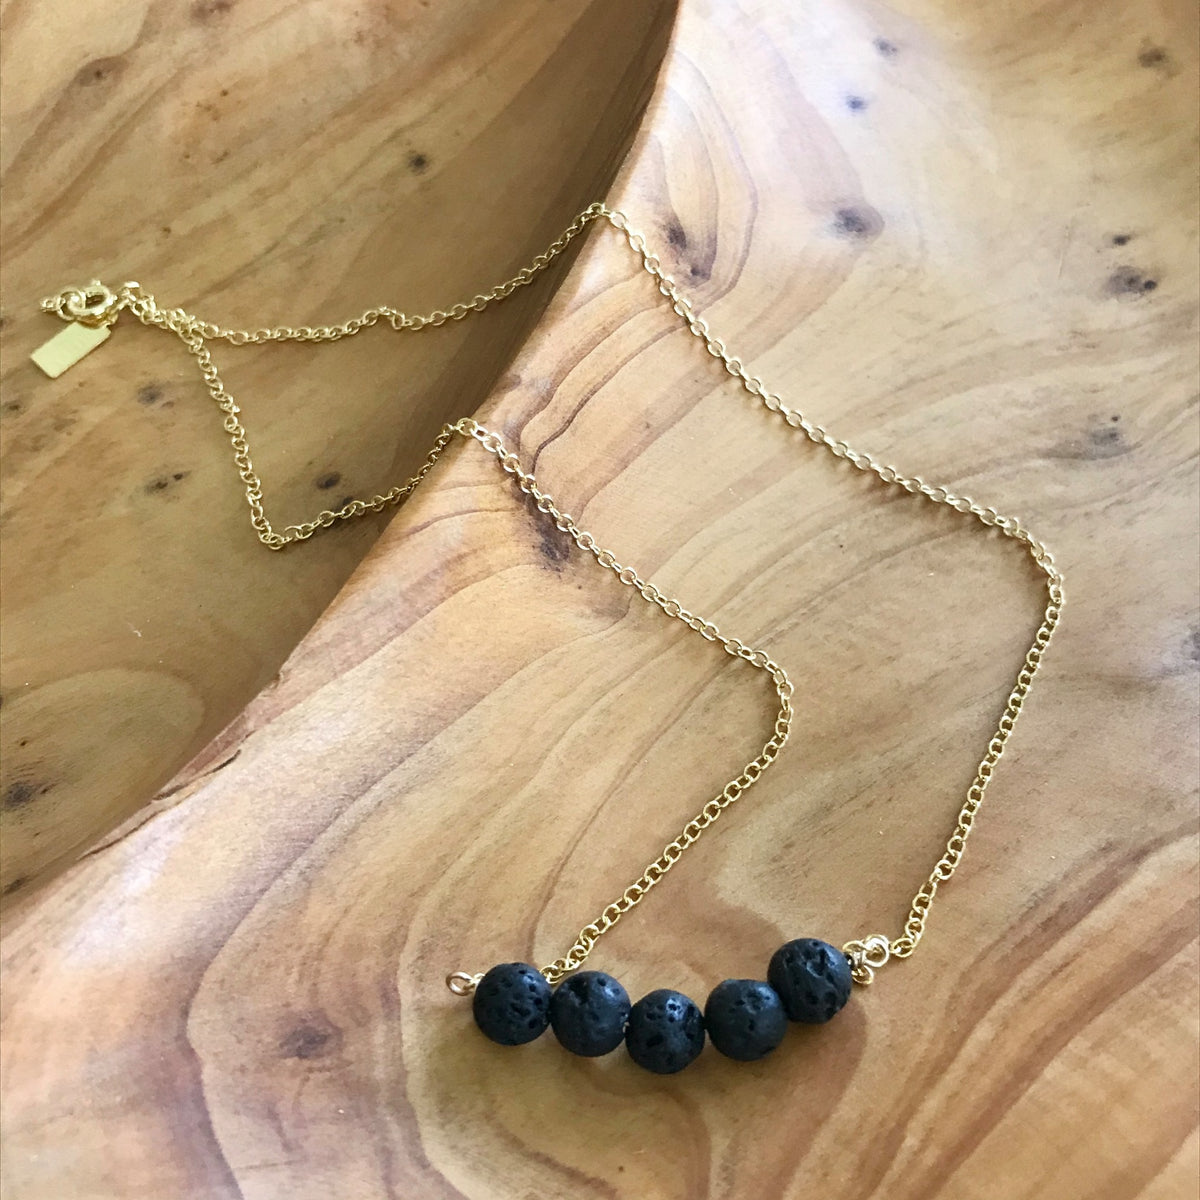 Gold filled necklace with black lava rocks for essential oil aromatherapy. Made in the U.S.A. by Lotus Jewelry Studio.